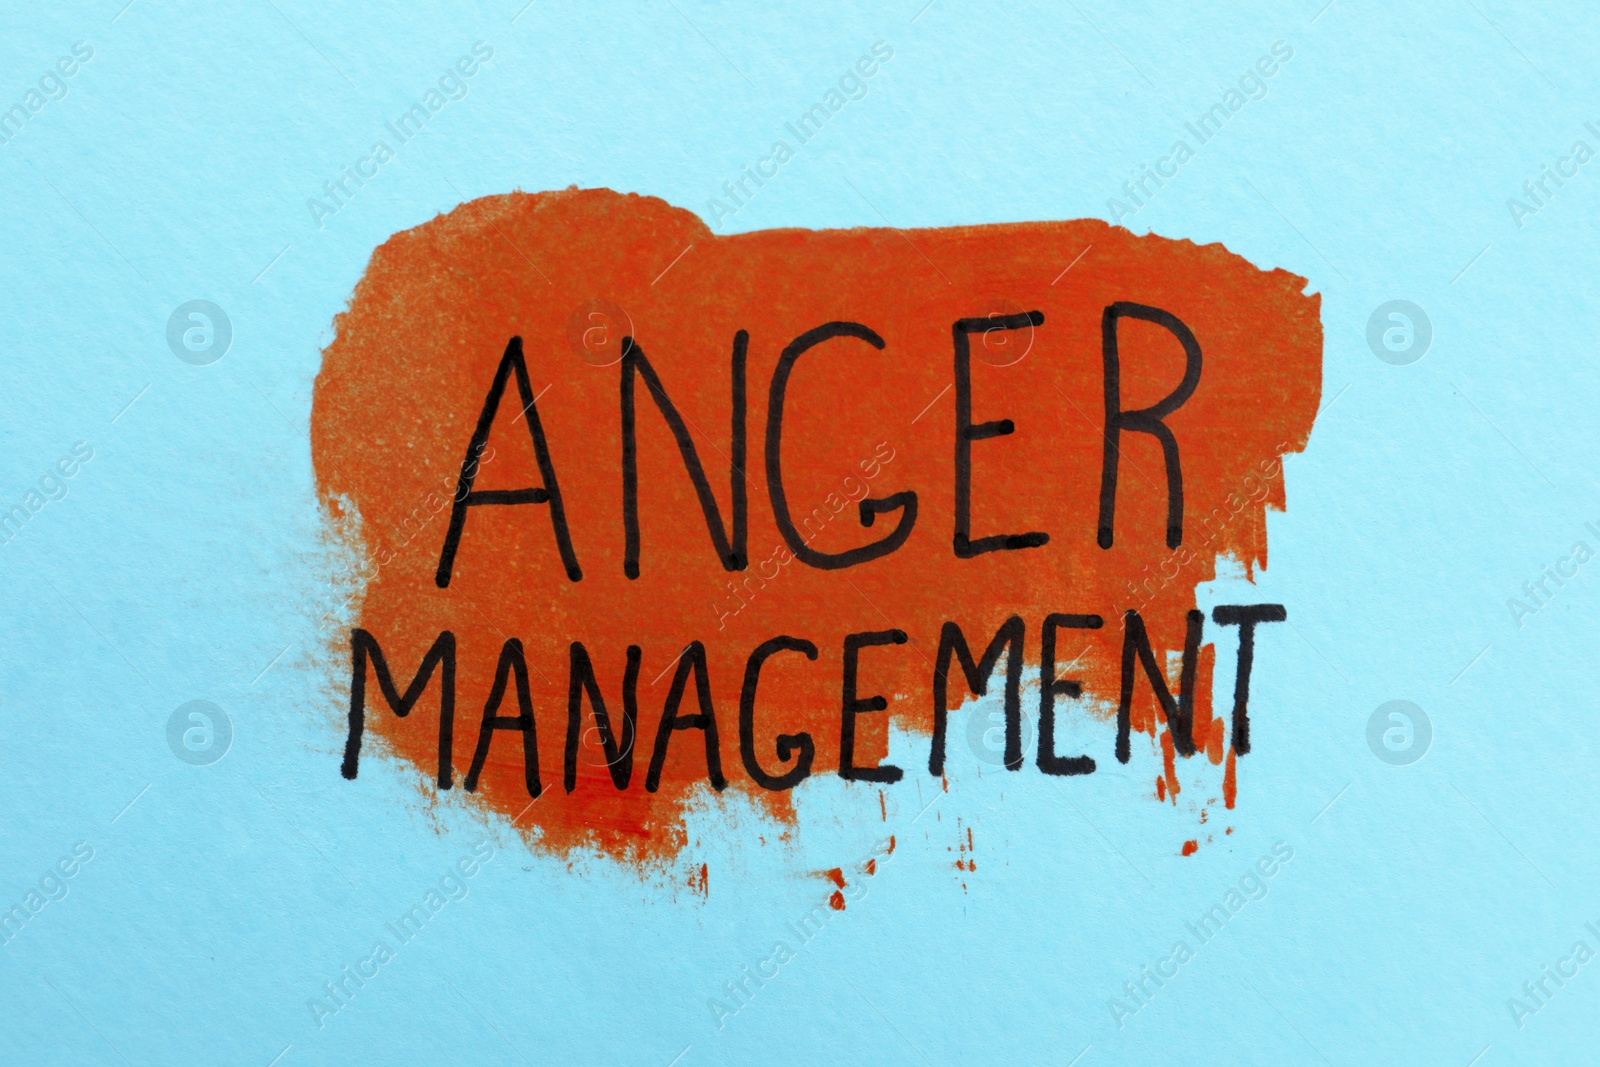 Photo of Phrase Anger Management written on light blue background with color paint